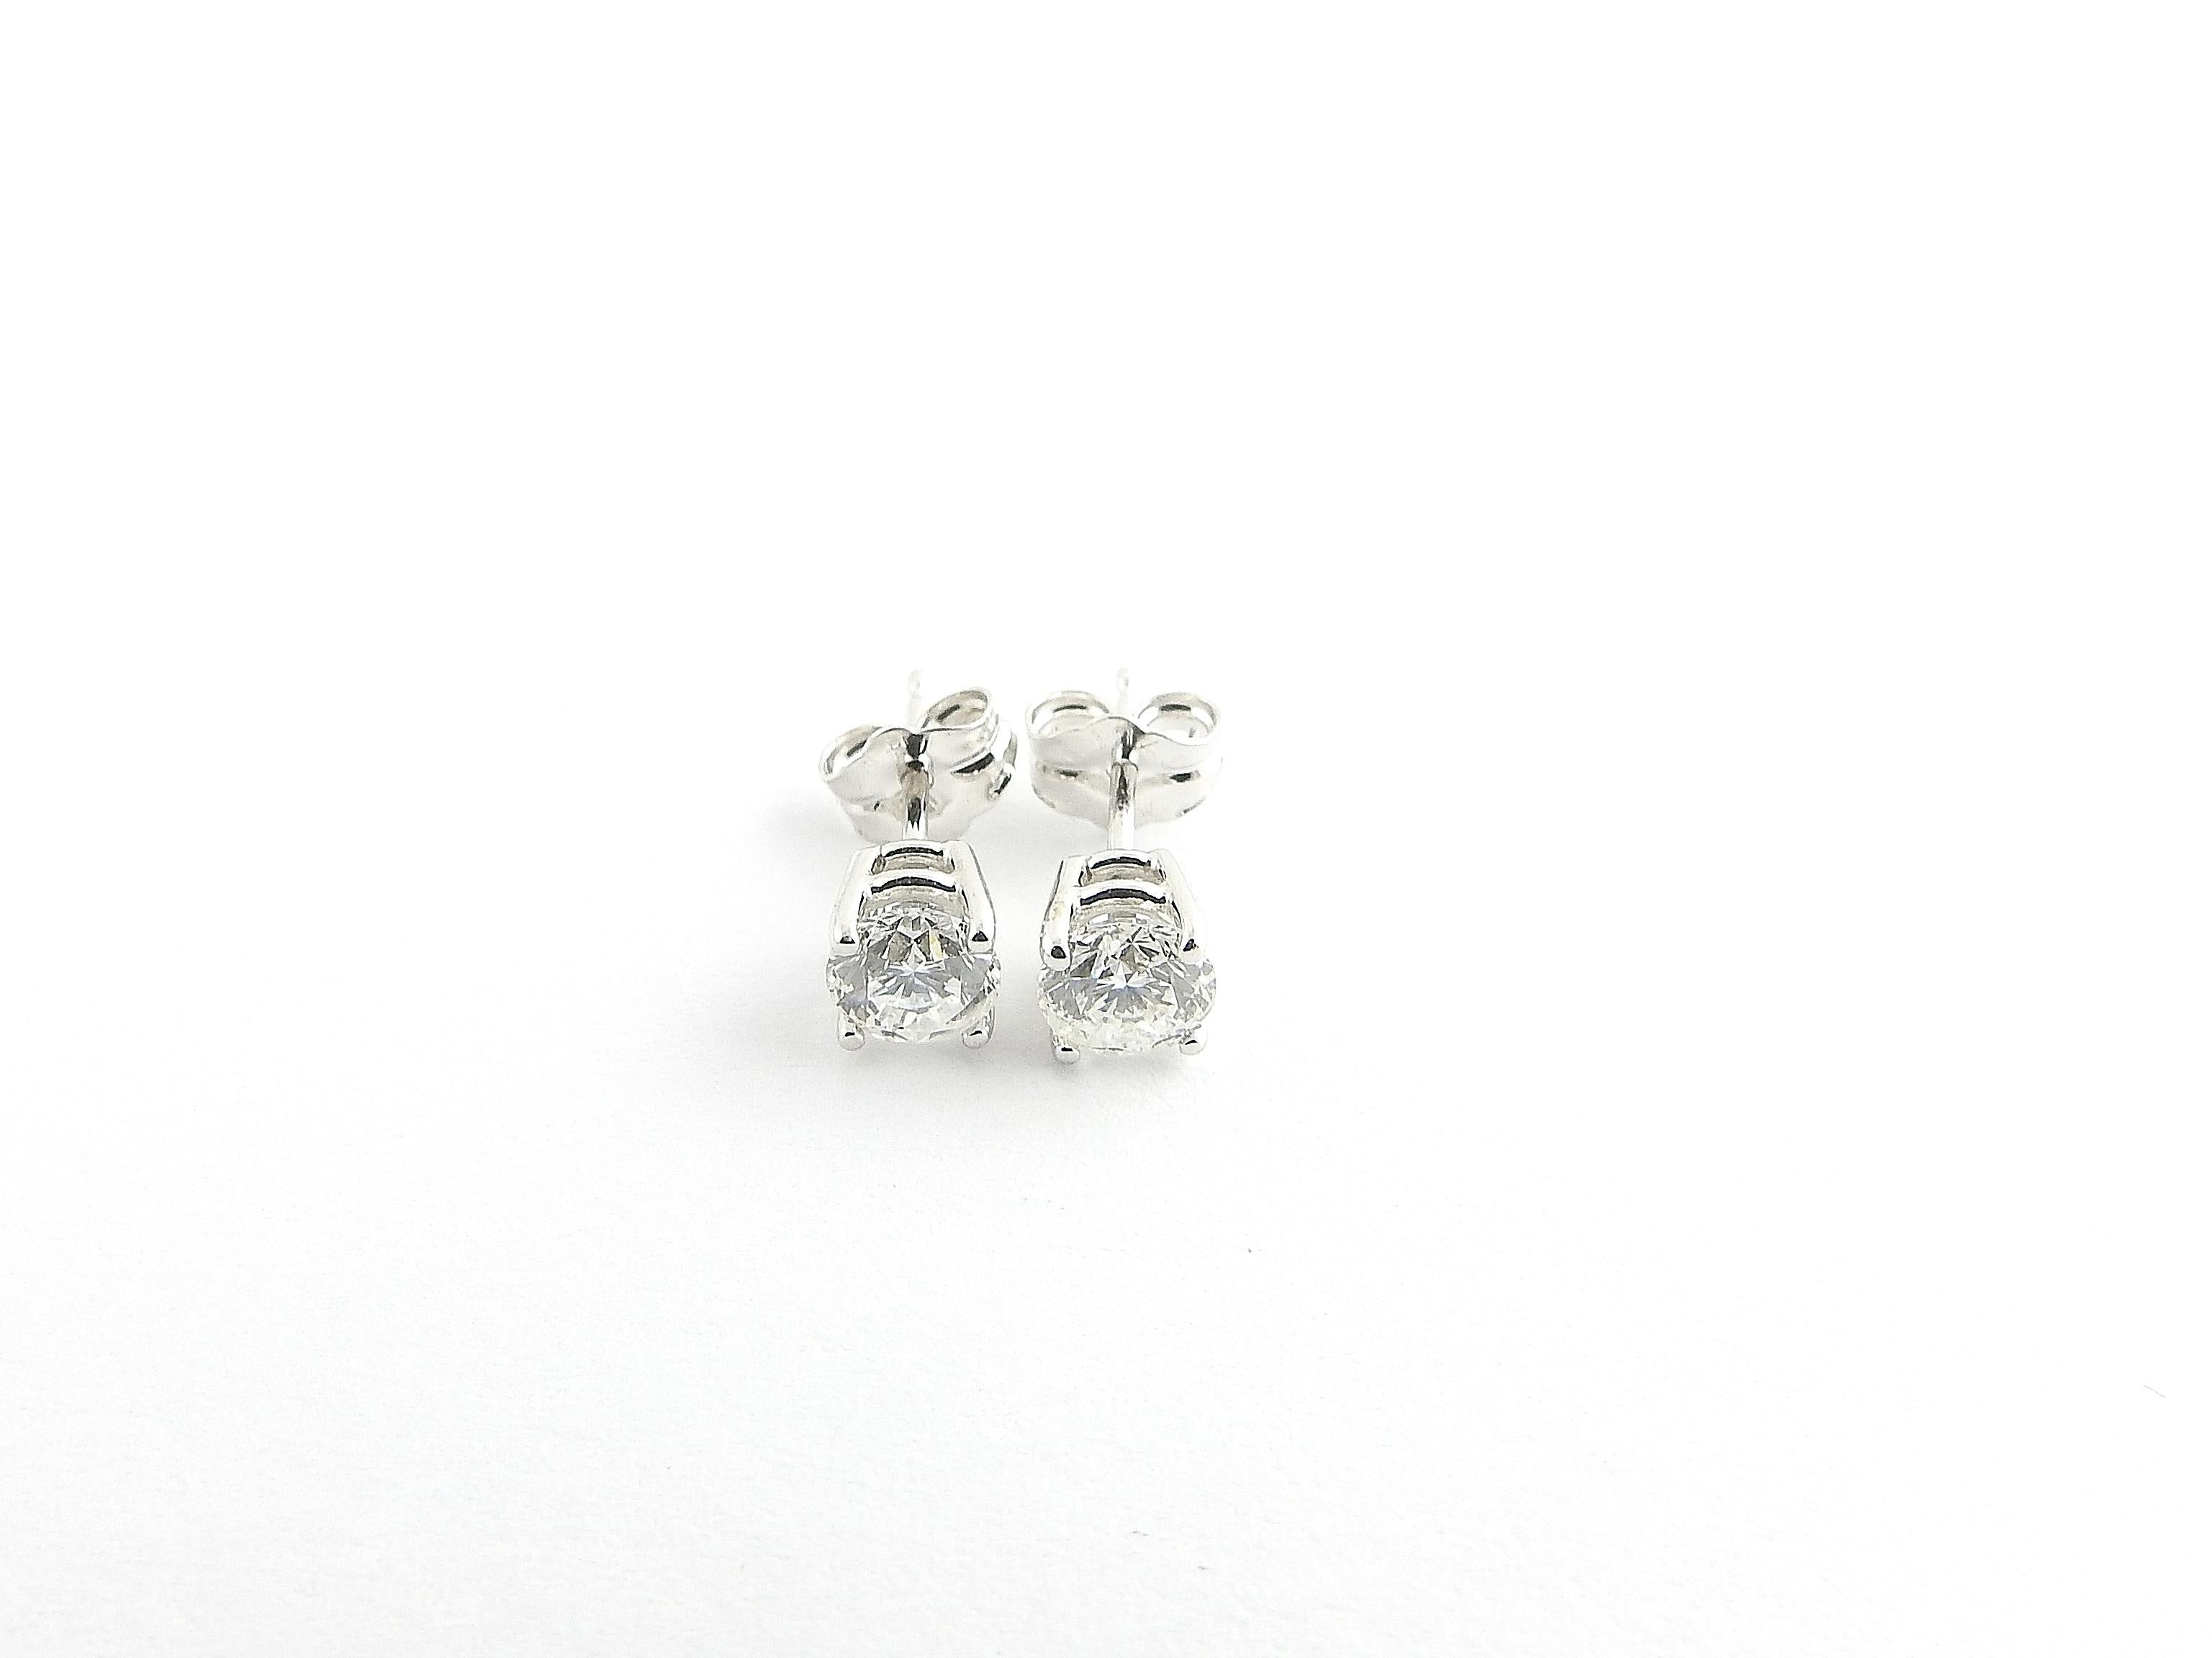 Vintage 14 Karat White Gold Diamond Stud Earrings .67 ct. twt.

These sparkling earrings each feature one round brilliant cut diamond set in classic 14K white gold. Push back closures.

Approximate total diamond weight: .67 ct.

Diamond color: